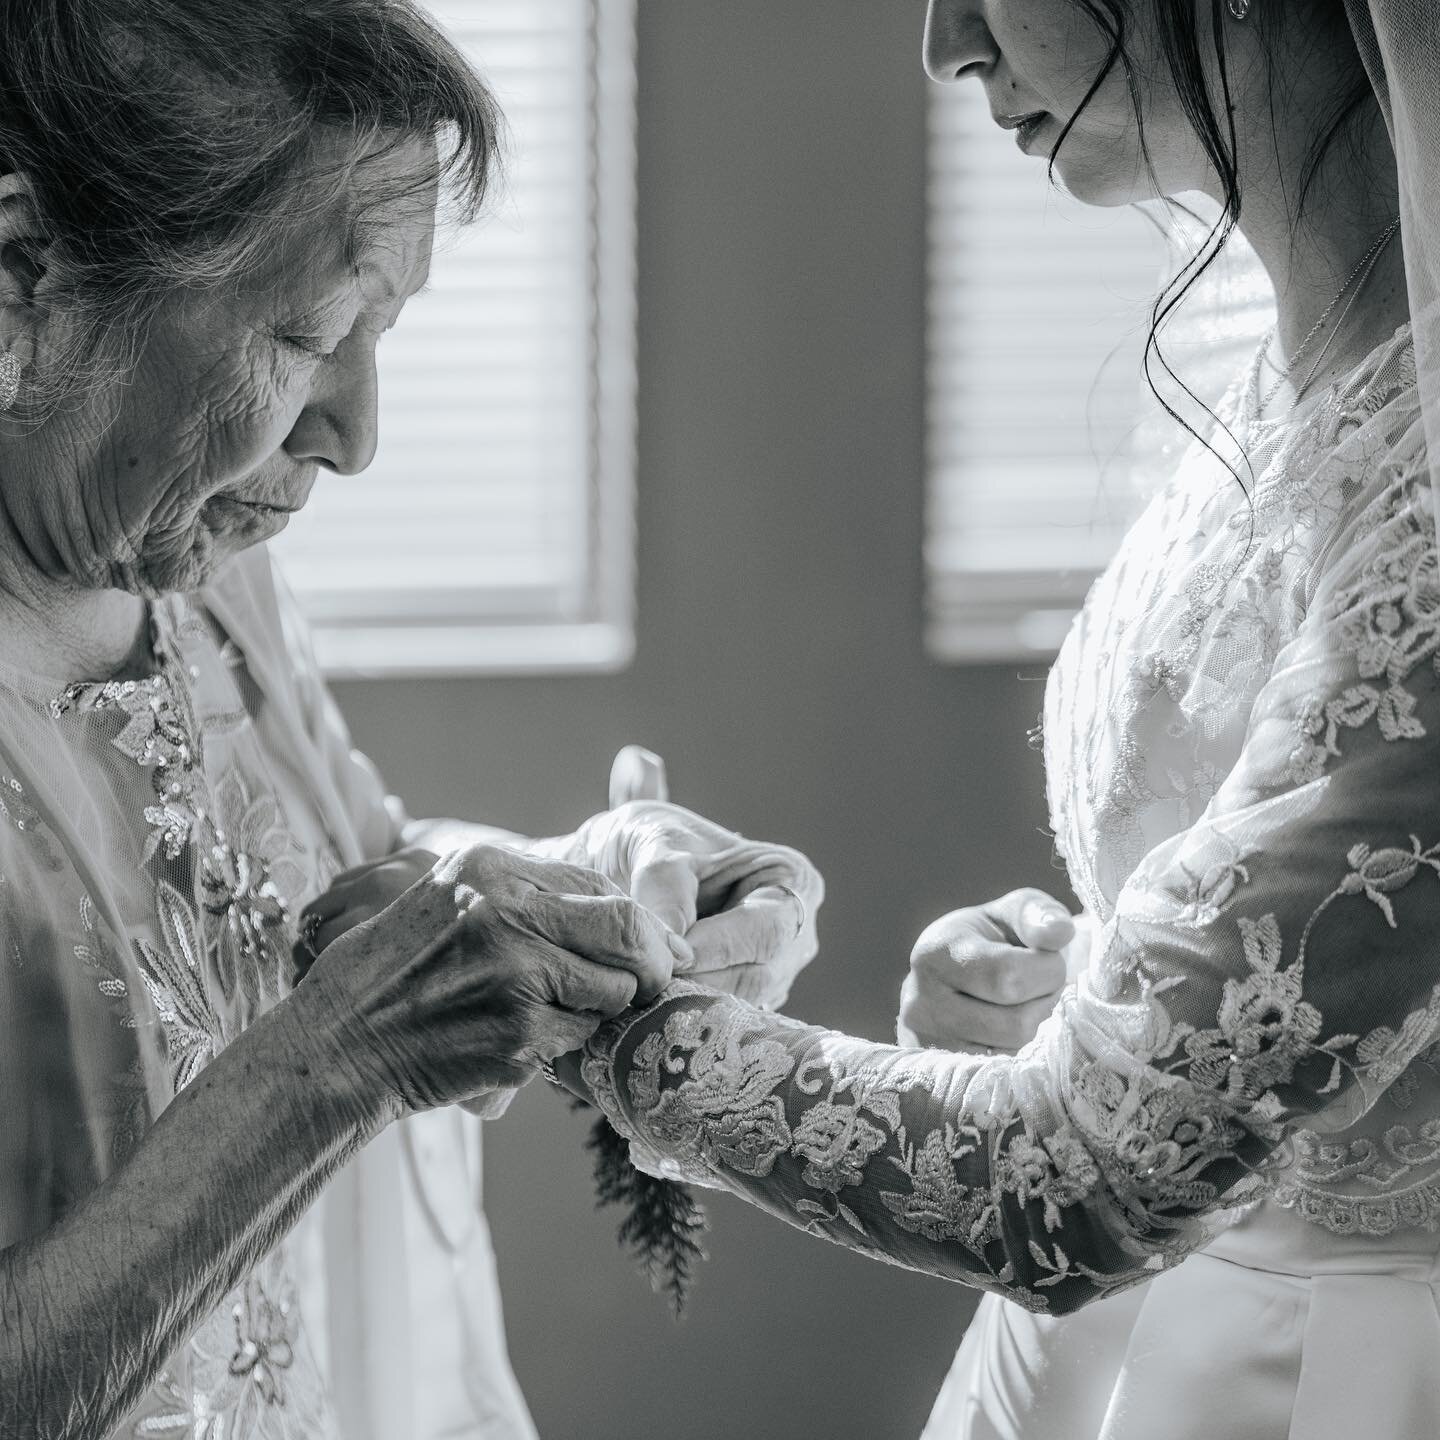 Glimpses of getting ready with the sweetest family members. A prayer with mom and a bracelet fix with grandma. 

Shout out to @jess.amsberry for capturing beautiful moments!

#portraiturebyalex #photography #coloradophotographer #coloradophotography 